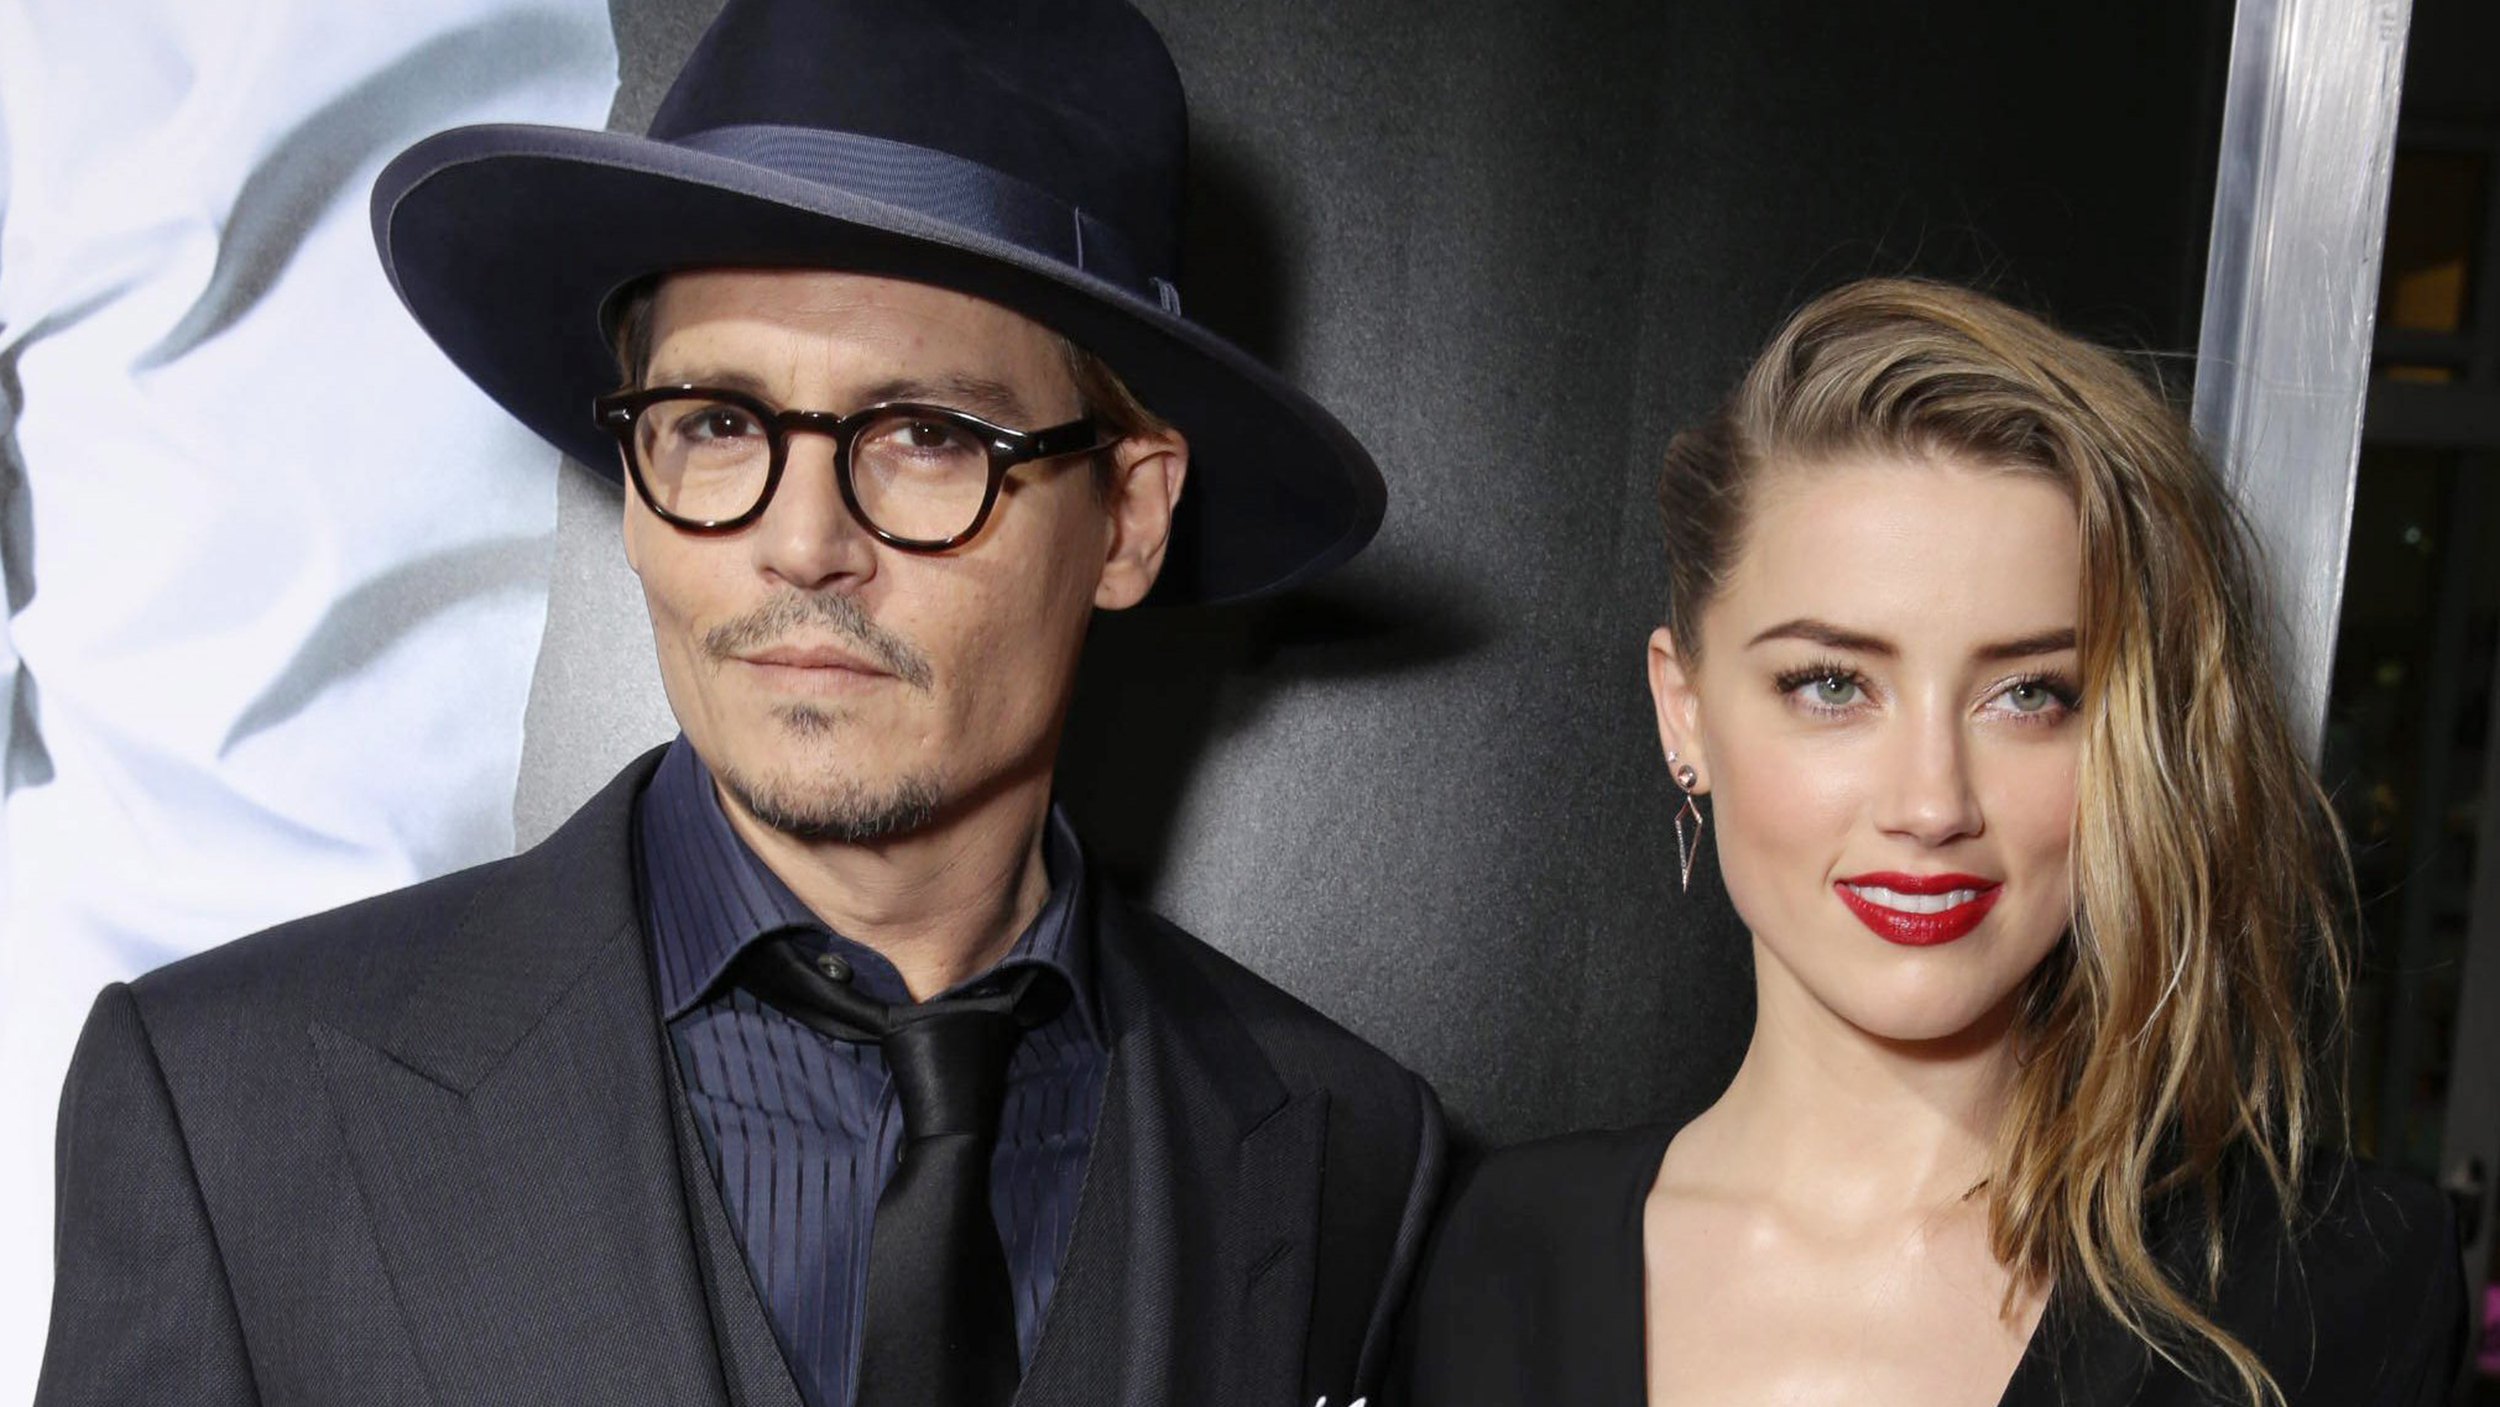 As the Amber Heard-Johnny Depp legal battle rages, here is a look at some other celebrities who went through pangs of separation. Is it not better to move on in peace?